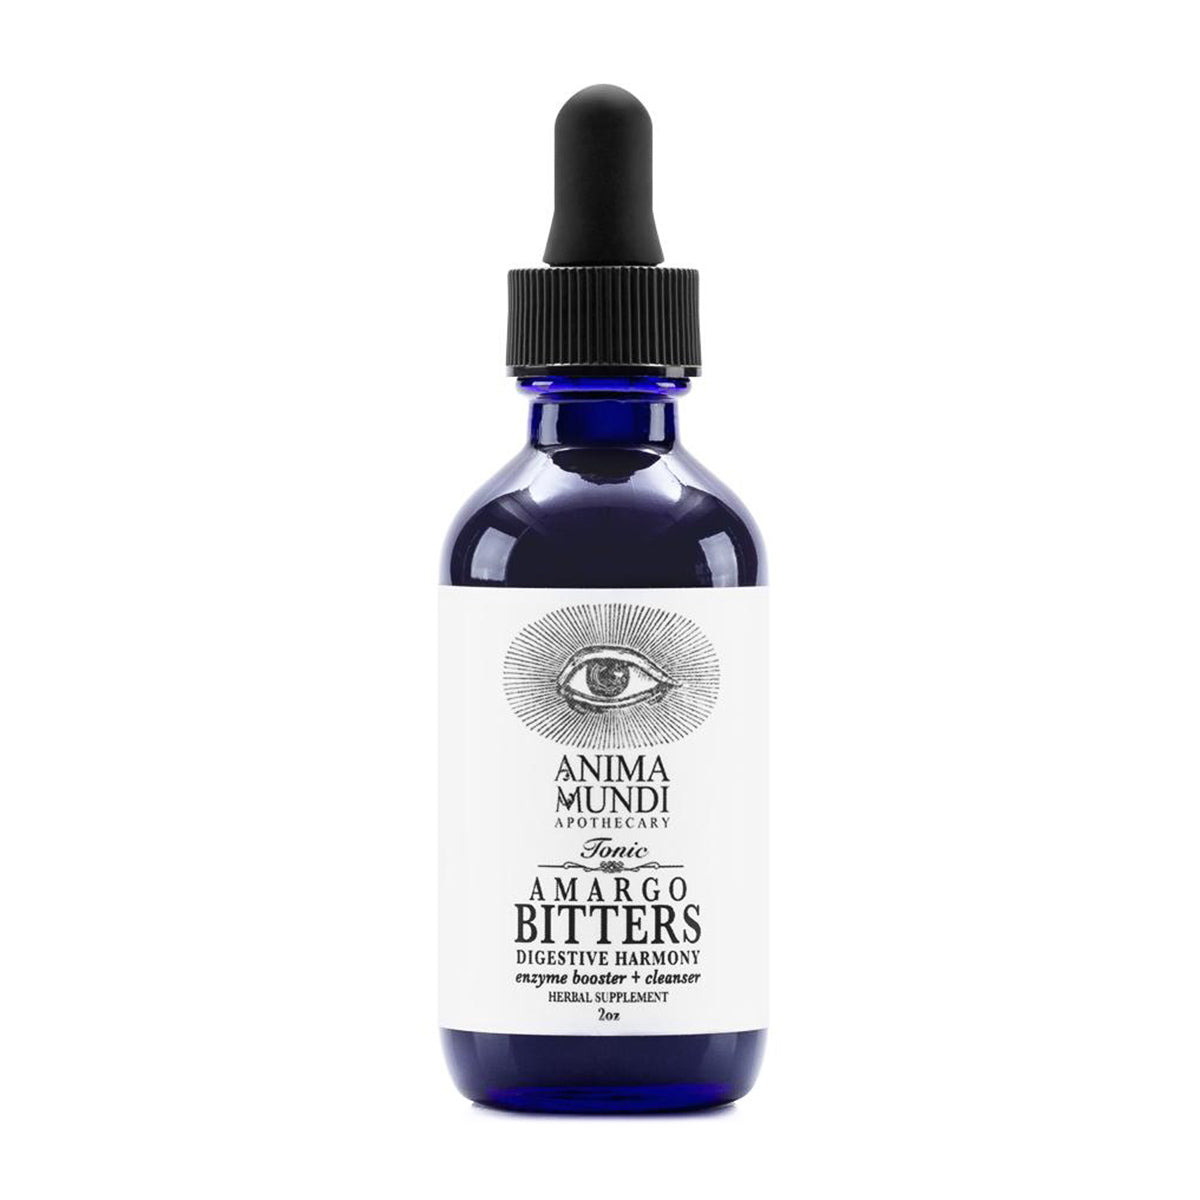 Amargo Bitters Tonic (2oz) | Anima Mundi Herbals | Raw Living UK | Herbs &amp; Tonic Herbs | Anima Mundi&#39;s Amargo Bitters Tonic is made from Bitter Leaves, Barks and Roots. It is created to Remove Stagnation, Increase Absorption and Demolish Old Phlegm.